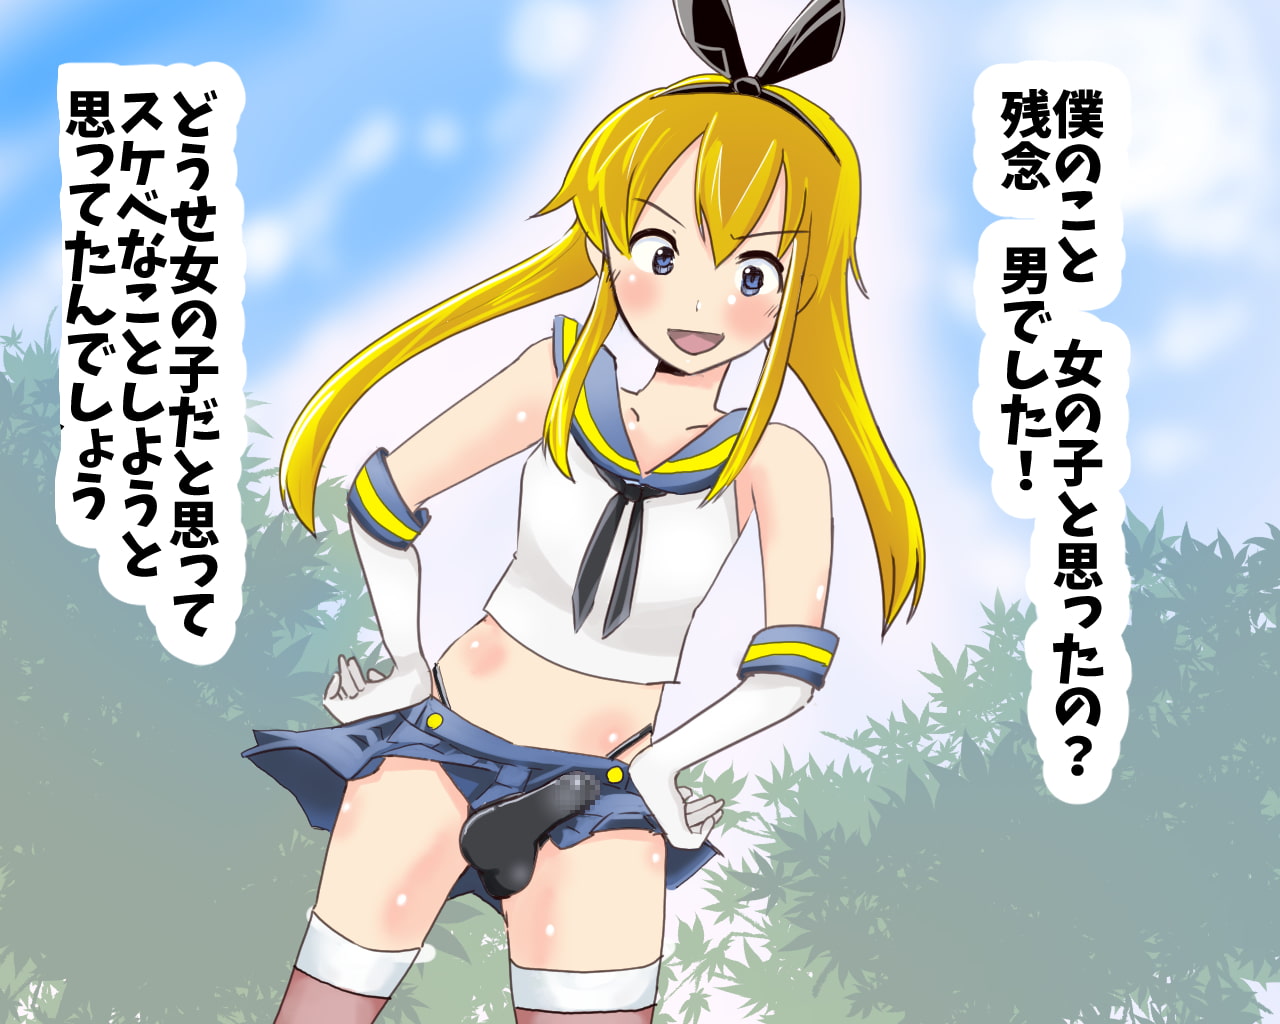 Shimakaze-kun gets caried away and sexually provokes a middle-aged guy!